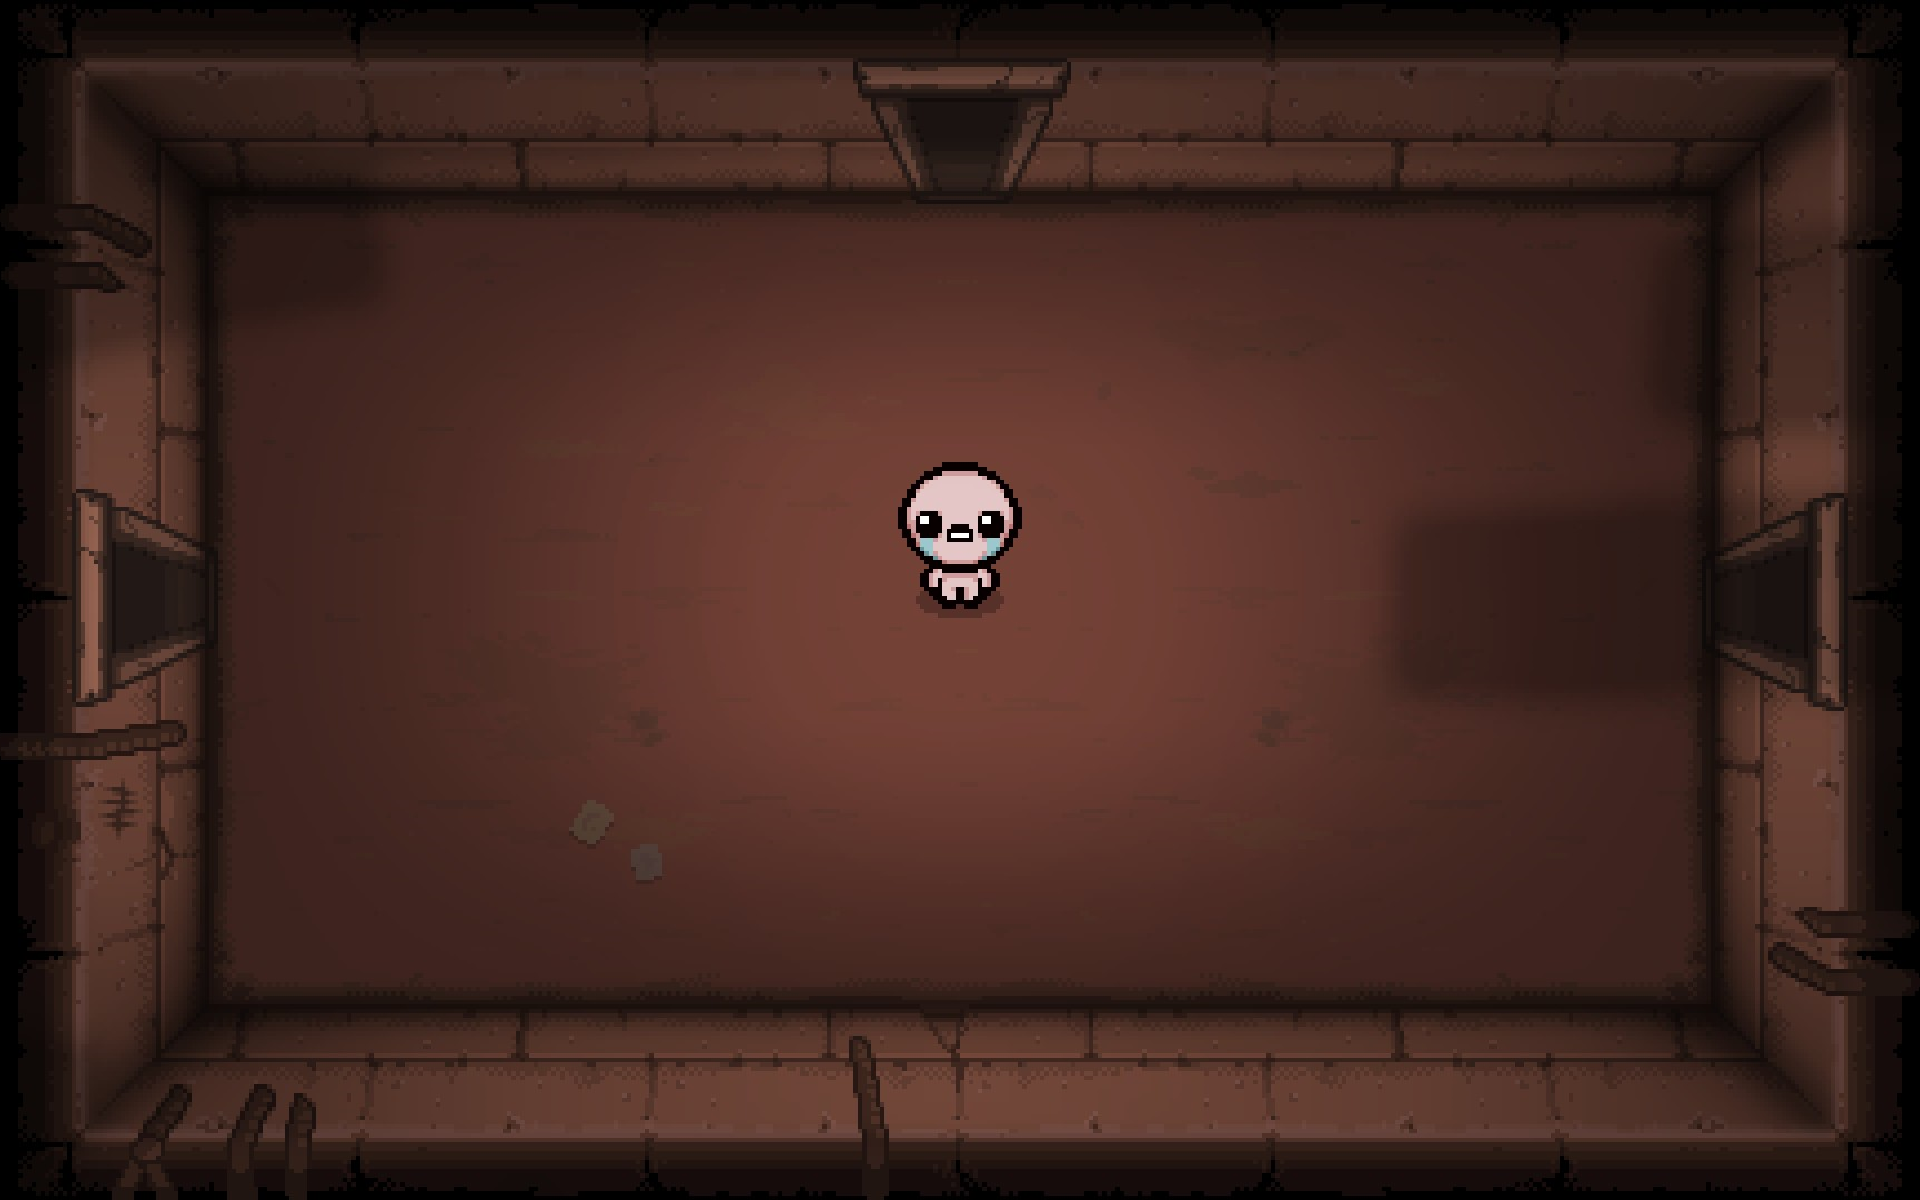 the binding of isaac afterbirth plus